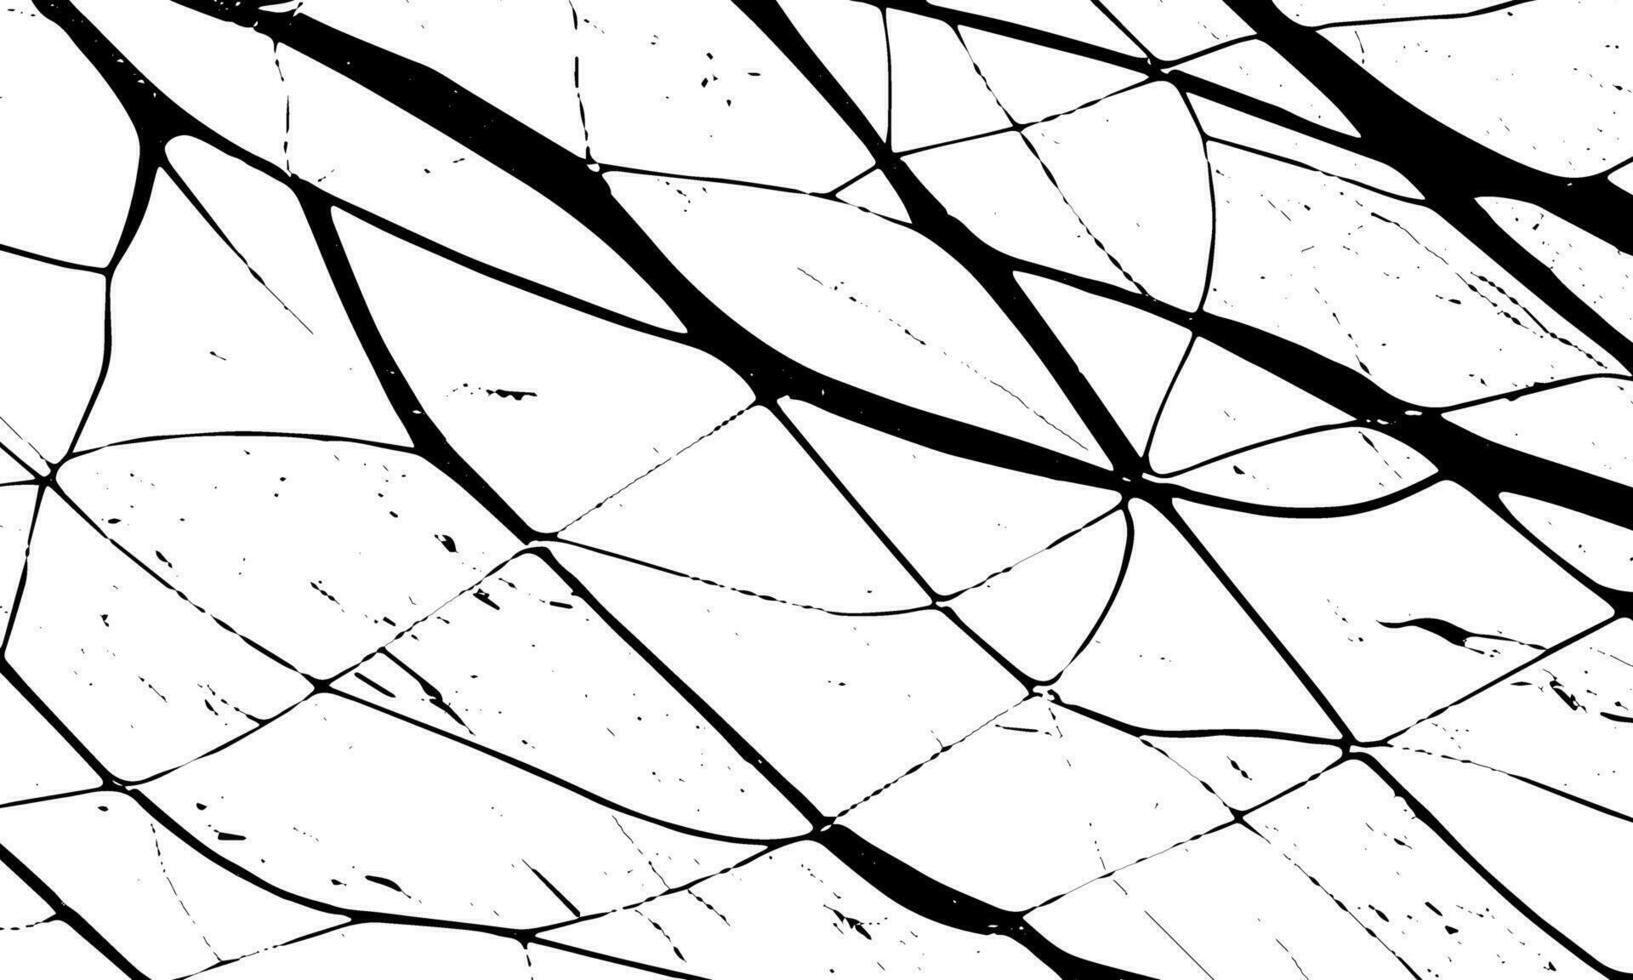 a black and white image of a cracked window vector